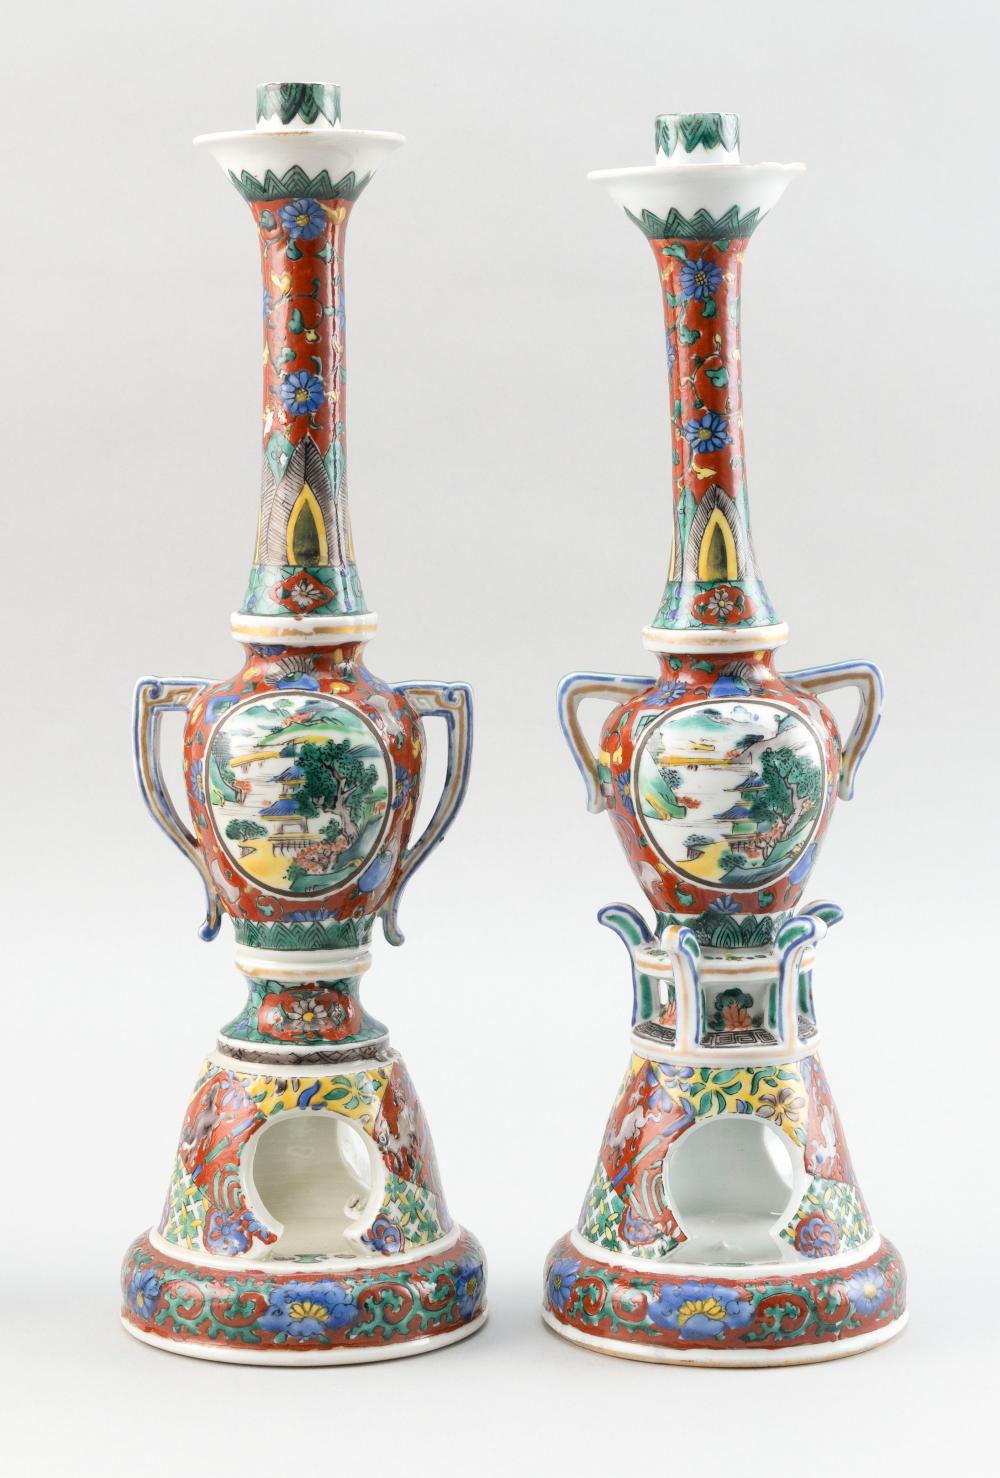 PAIR OF CHINESE POLYCHROME PORCELAIN 34c0d9